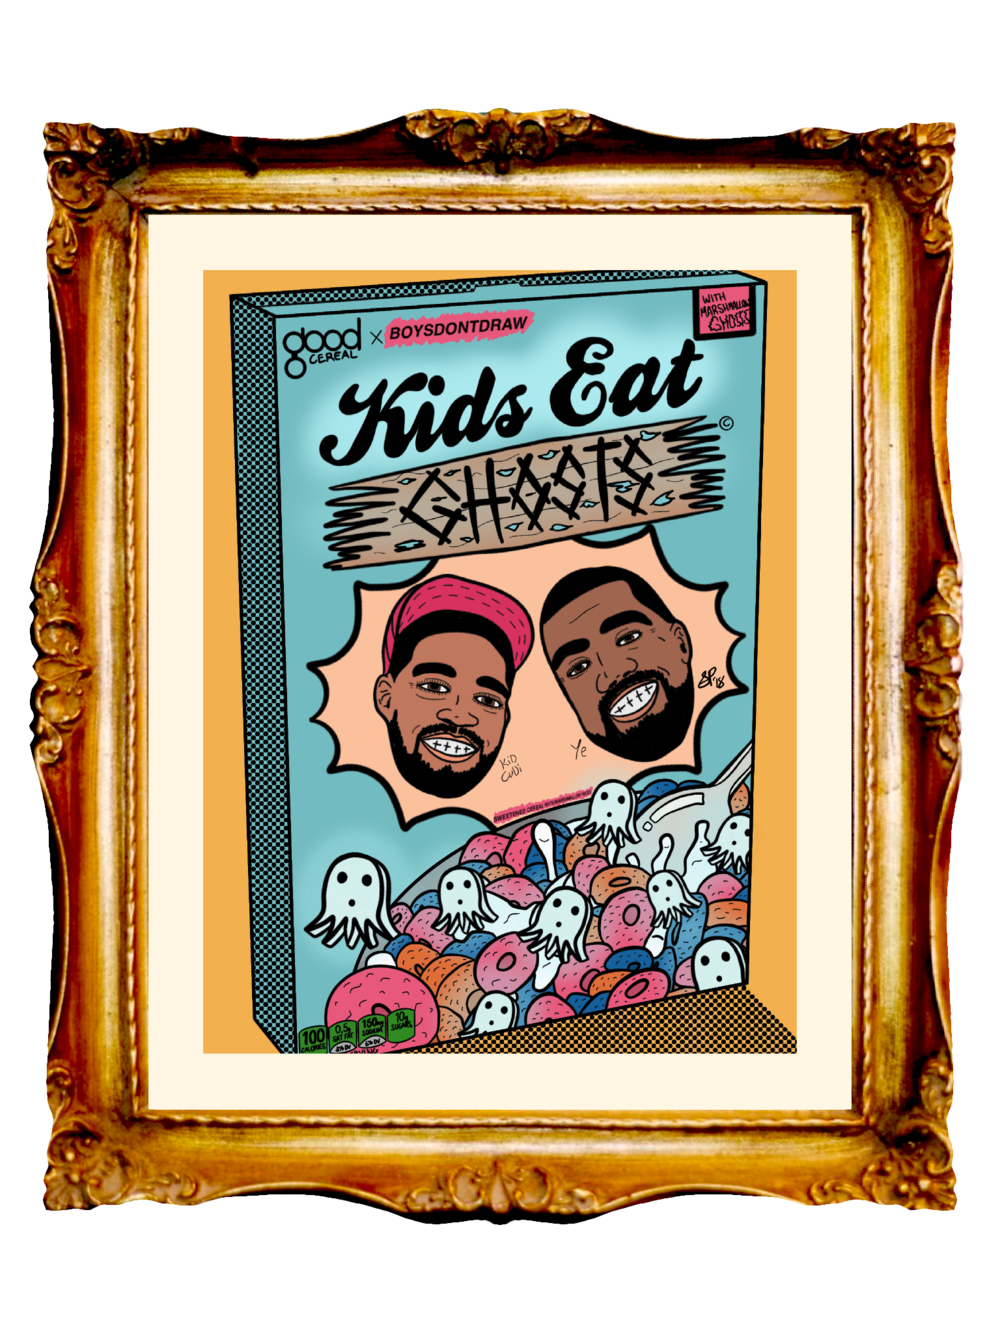 KIDS SEE GHOSTS - KIDS EAT GHOSTS - Limited Poster by BOYSDONTDRAW